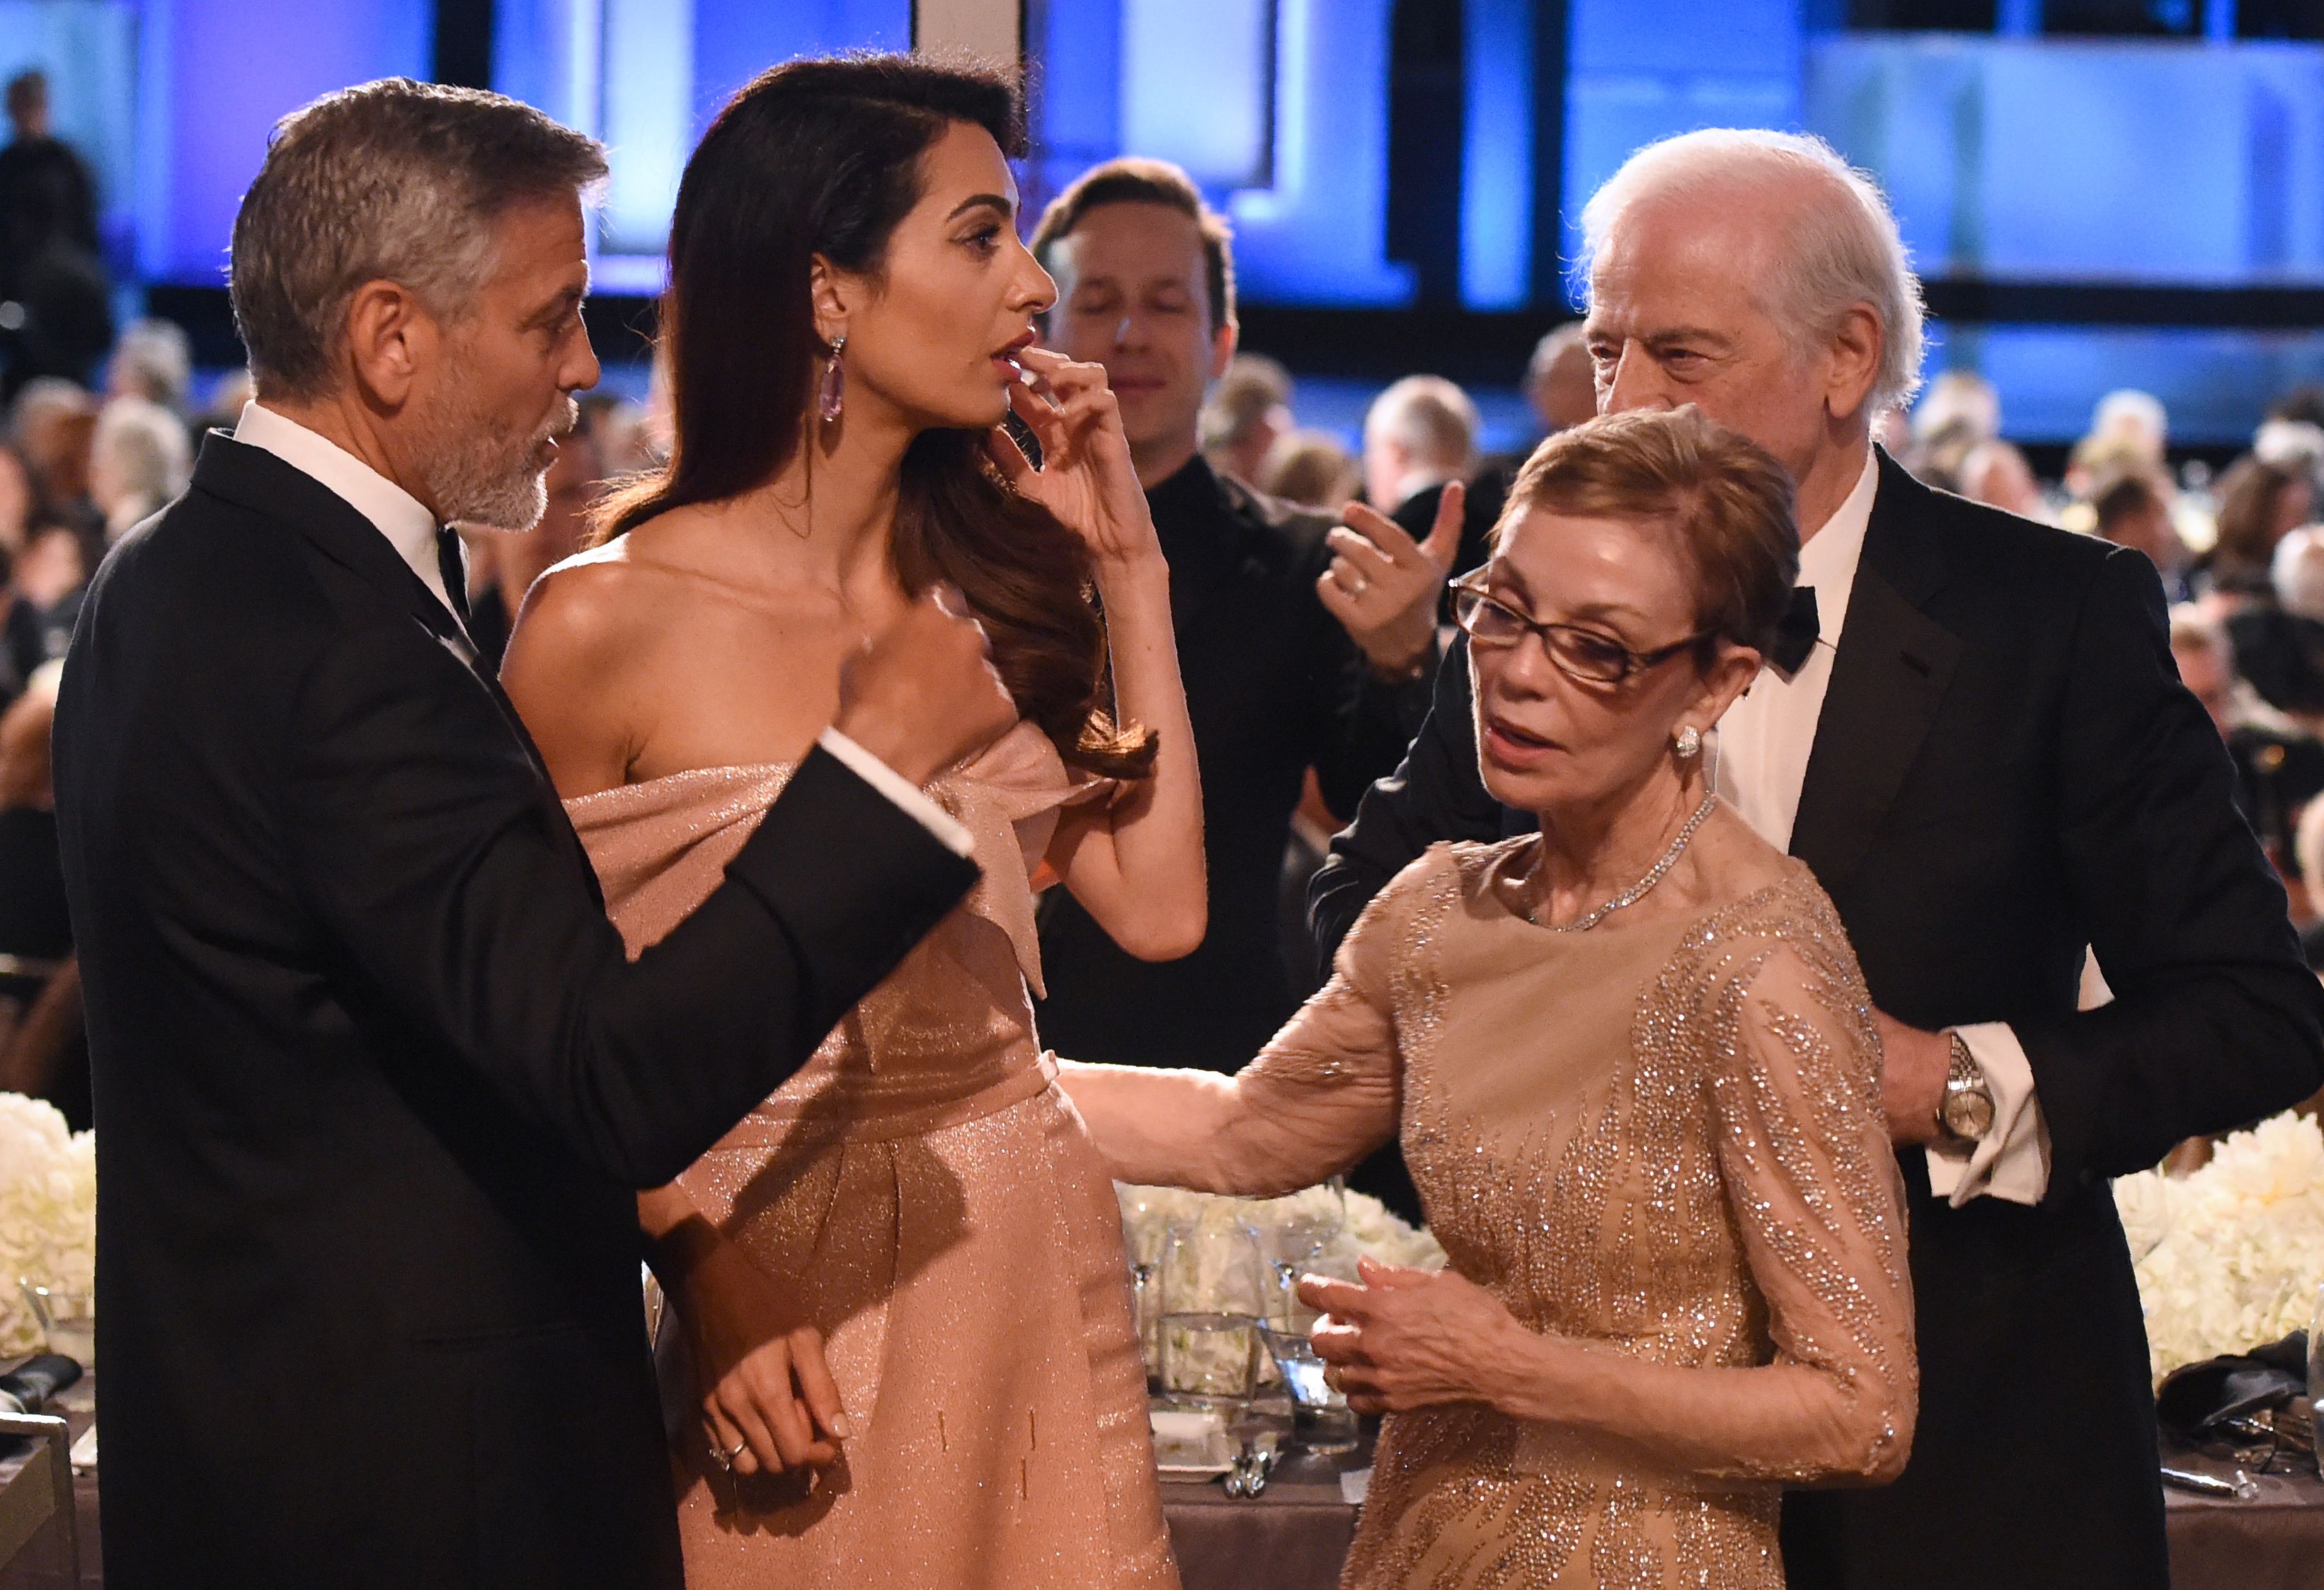 George and Amal Clooney with his parents, Nina Bruce Warren and Nick Clooney, at the 46th American Film Institute Life Achievement Award Gala in Hollywood on June 7, 2018. | Source: Getty Images